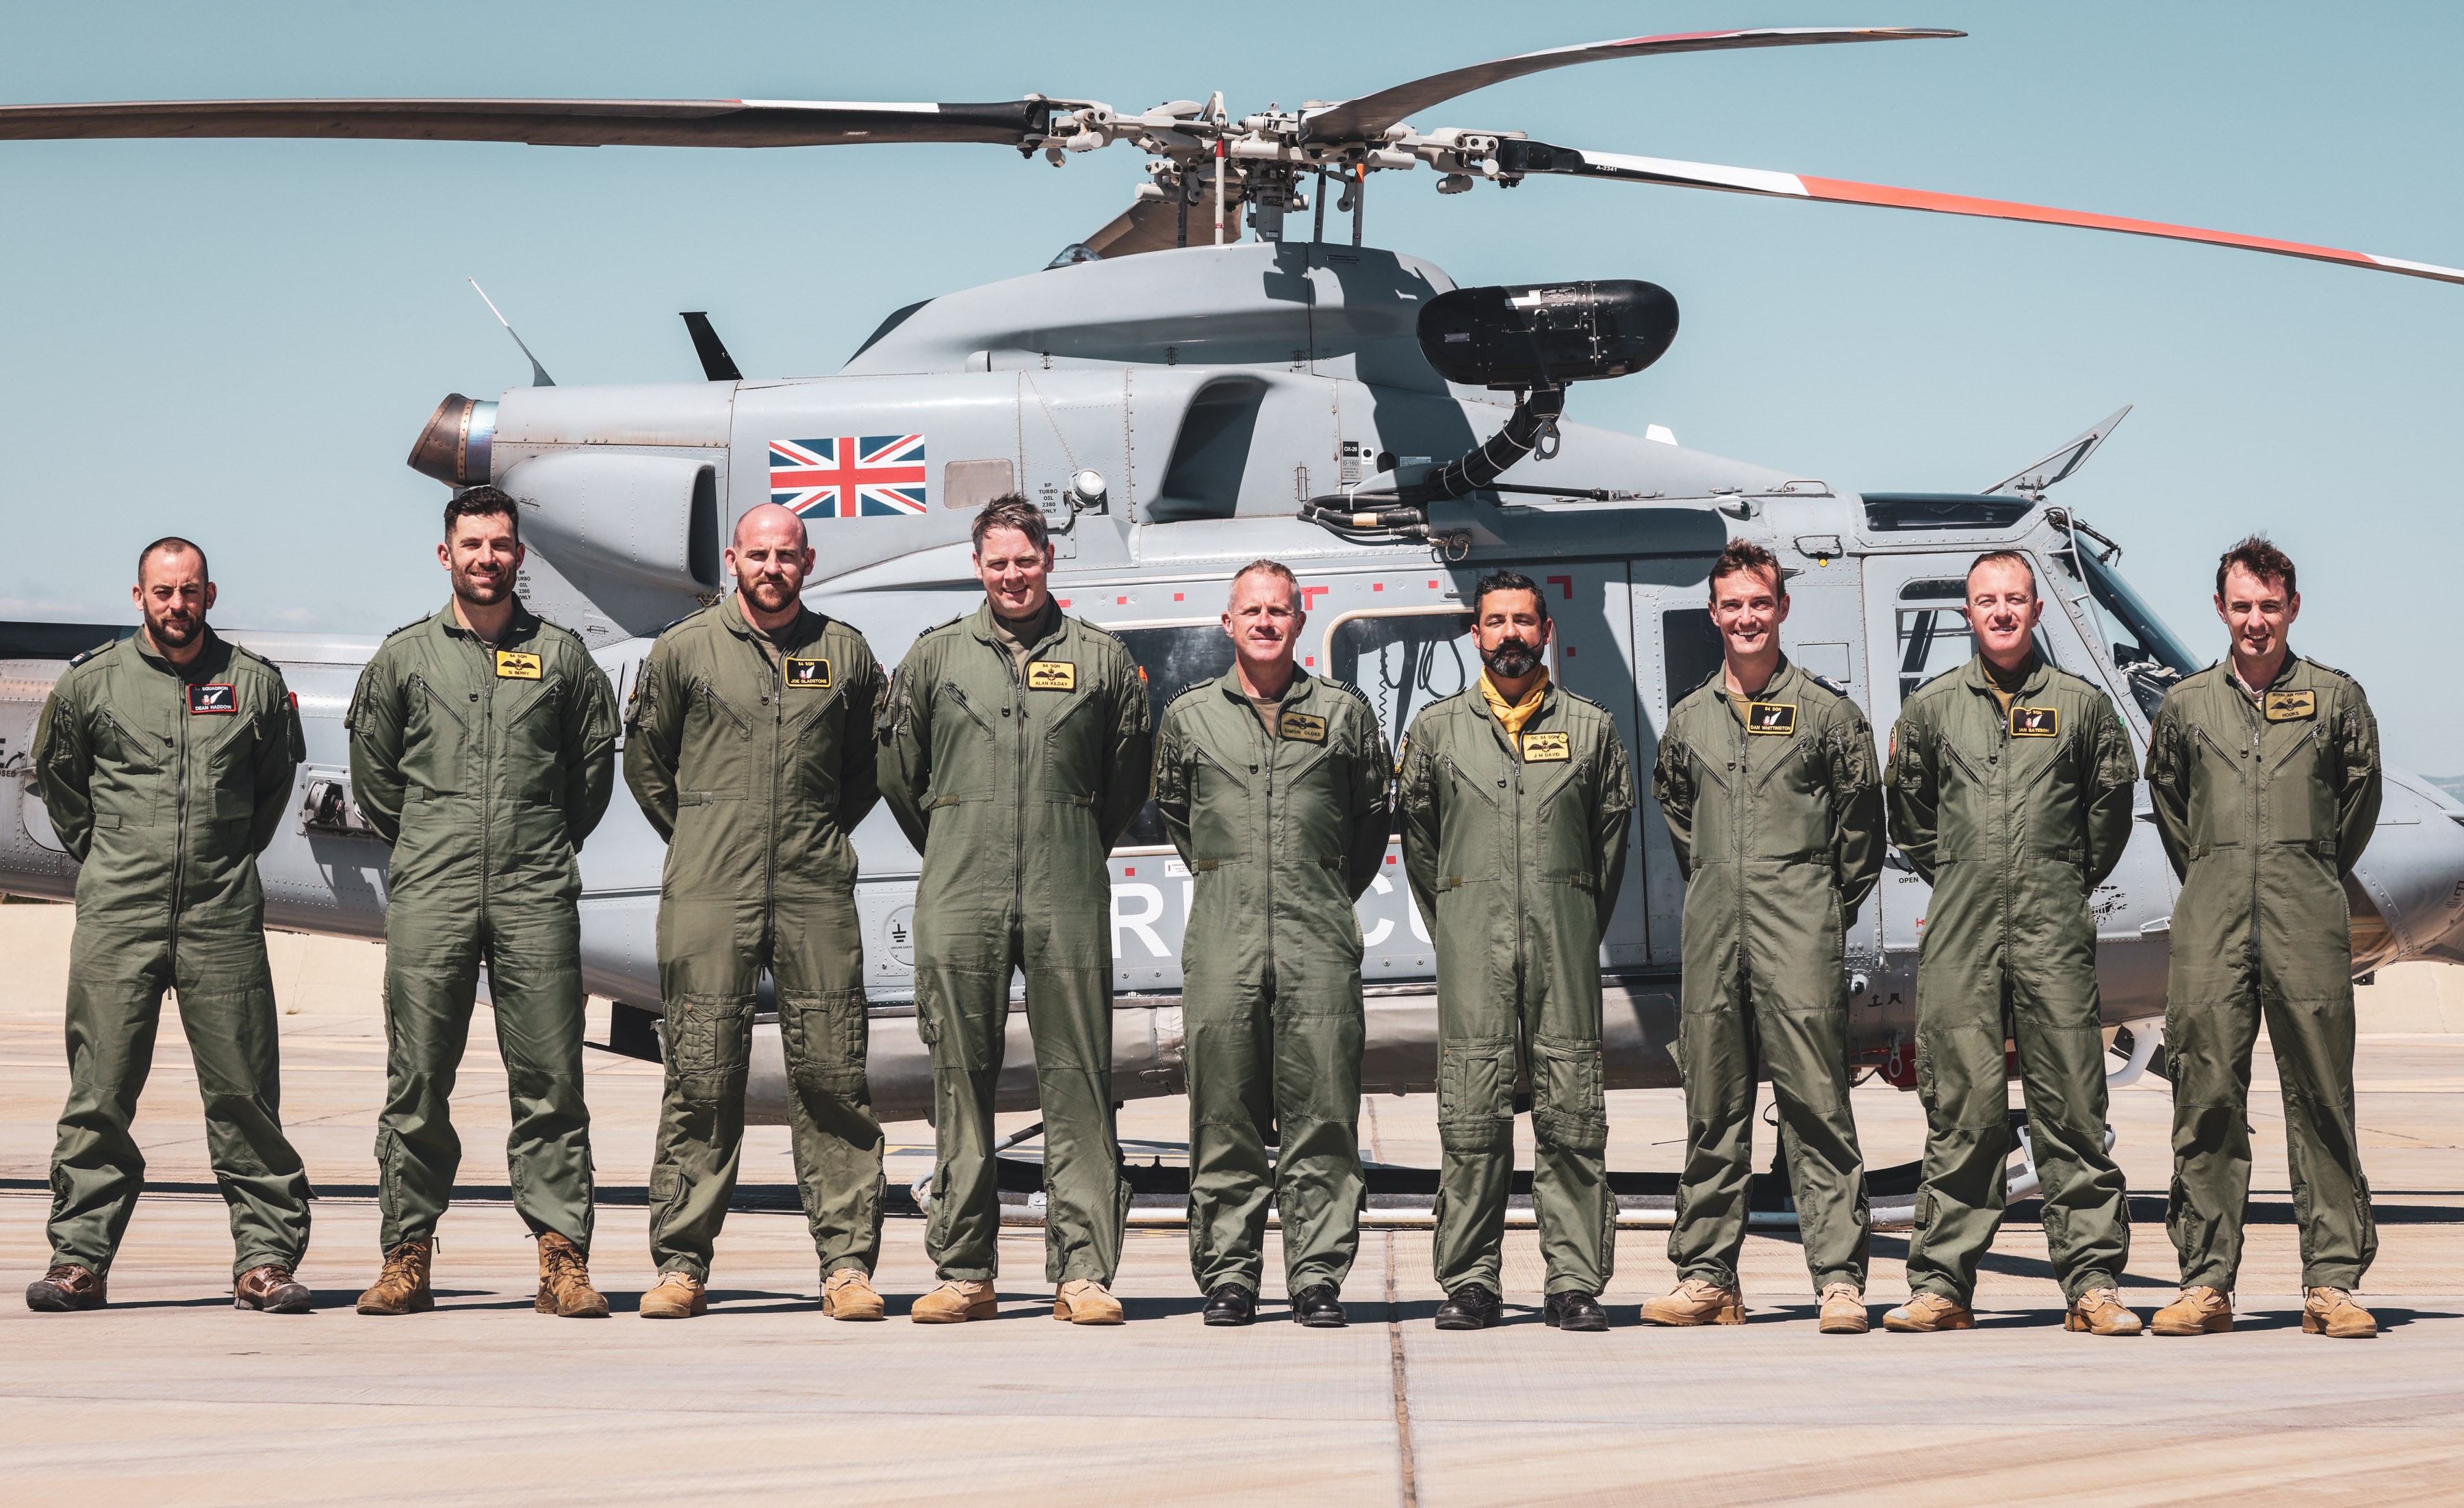 Image shows RAF pilot squadron standing by their helicopter.